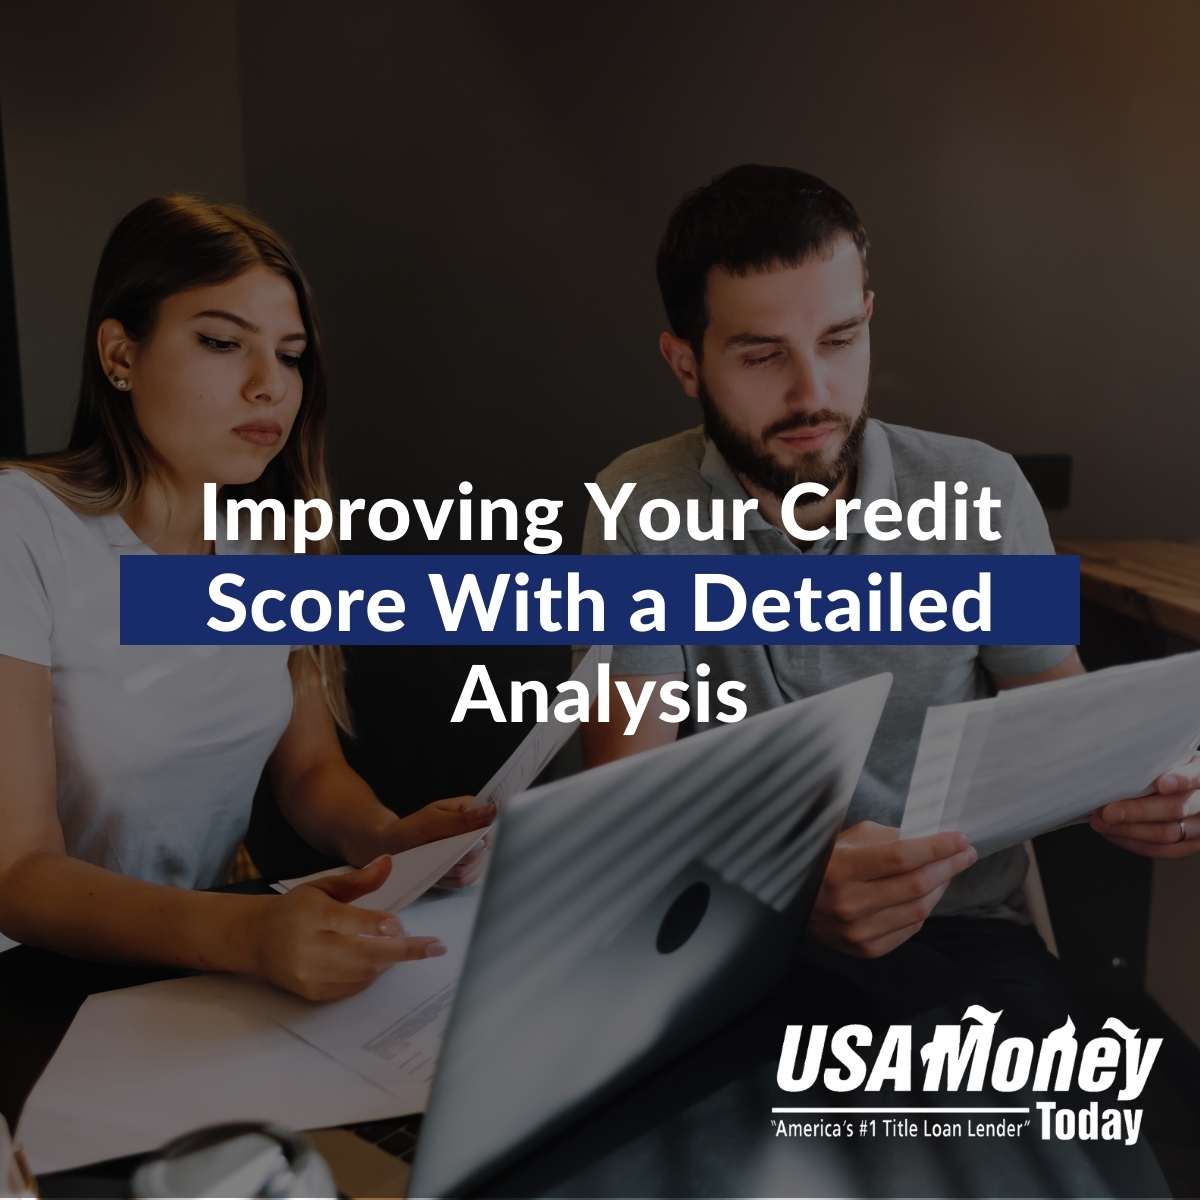 Improving Your Credit Score With a Detailed Analysis